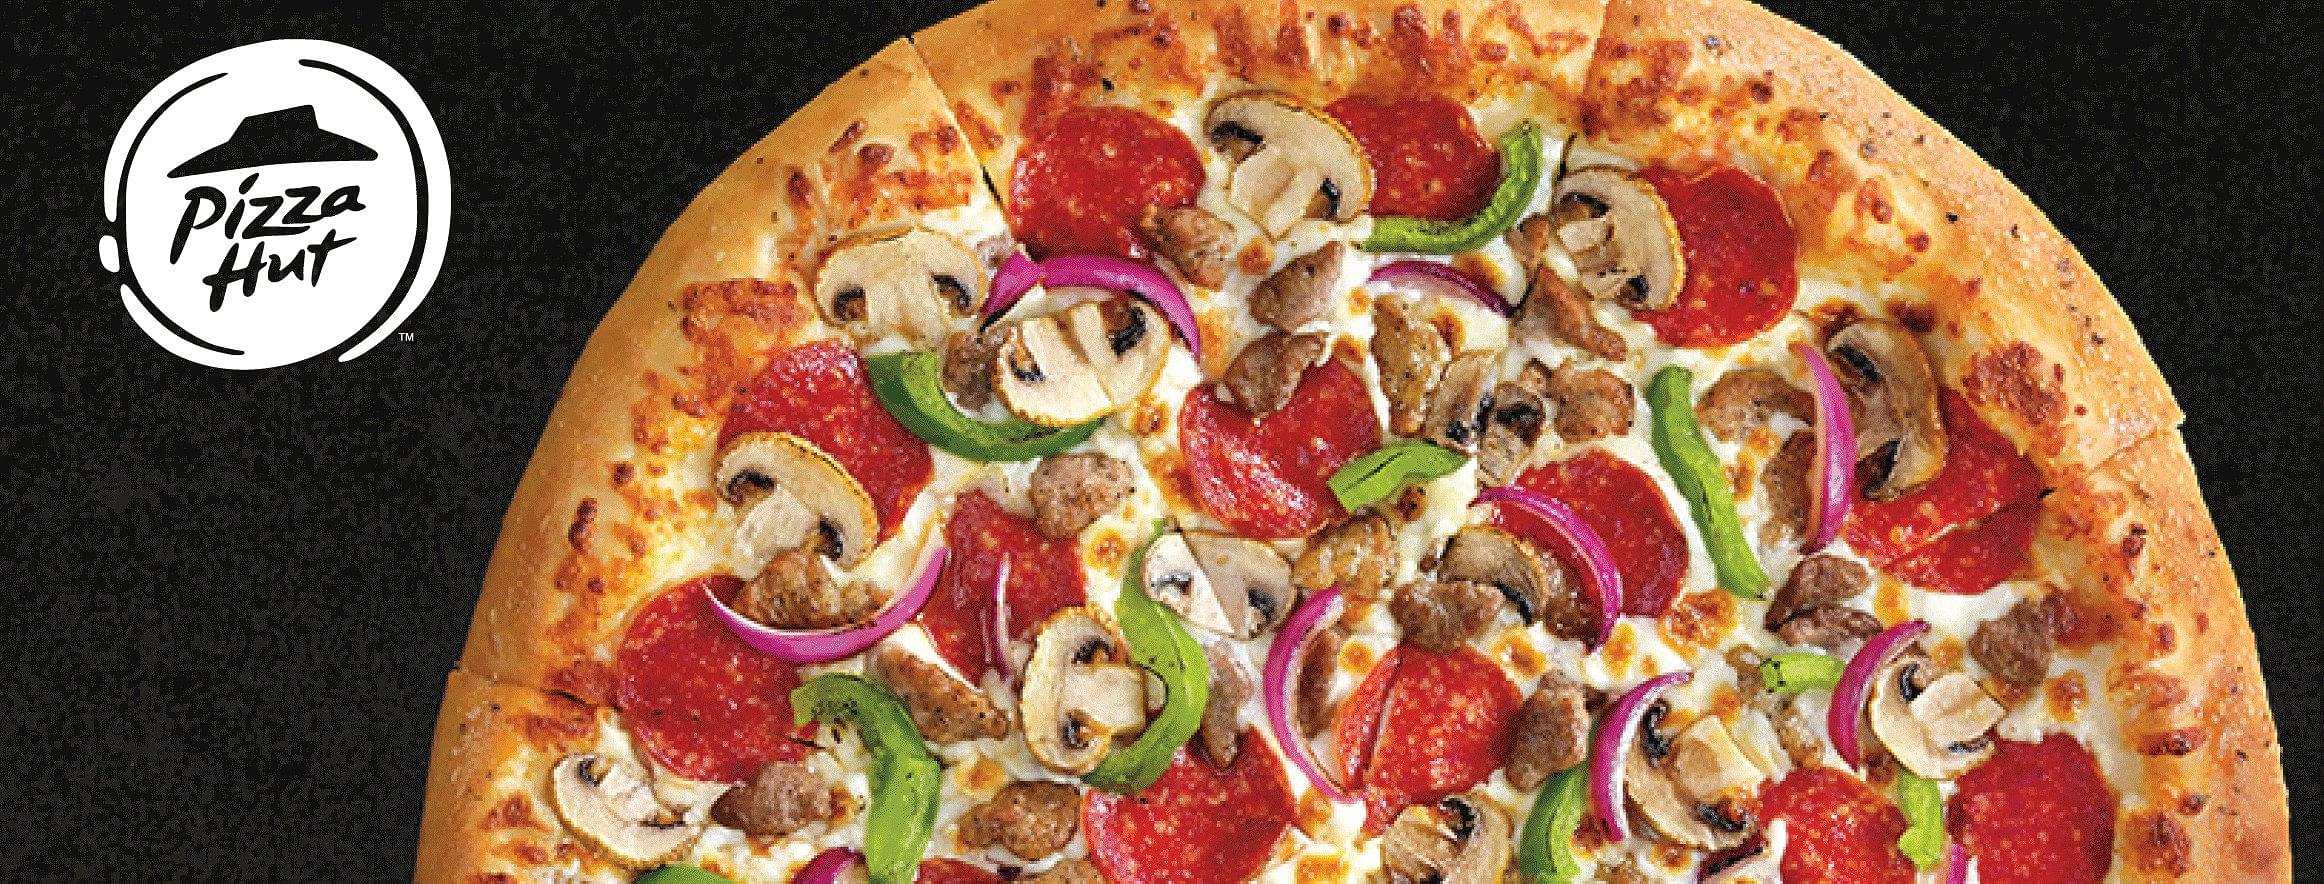 Pizza Hut Printable Coupons 2021 Flat 30 Off On Pizza Hut Menu With